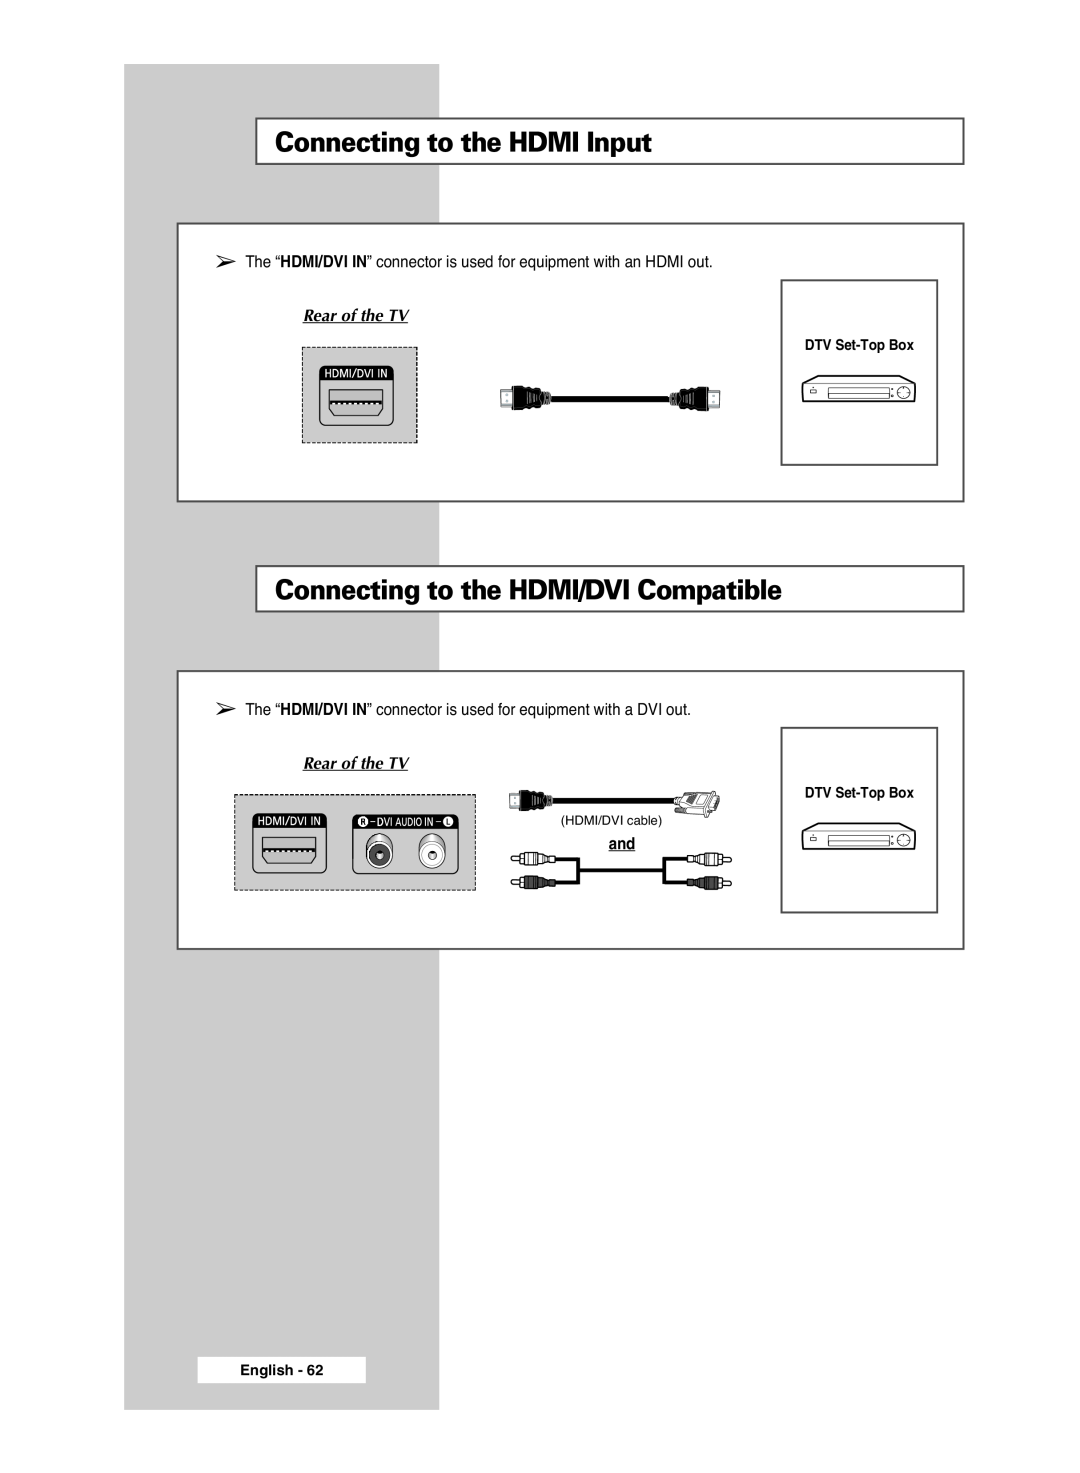 Samsung PS-42S5S manual Connecting to the HDMI Input, Connecting to the HDMI/DVI Compatible, Rear of the TV, HDMI/DVI cable 